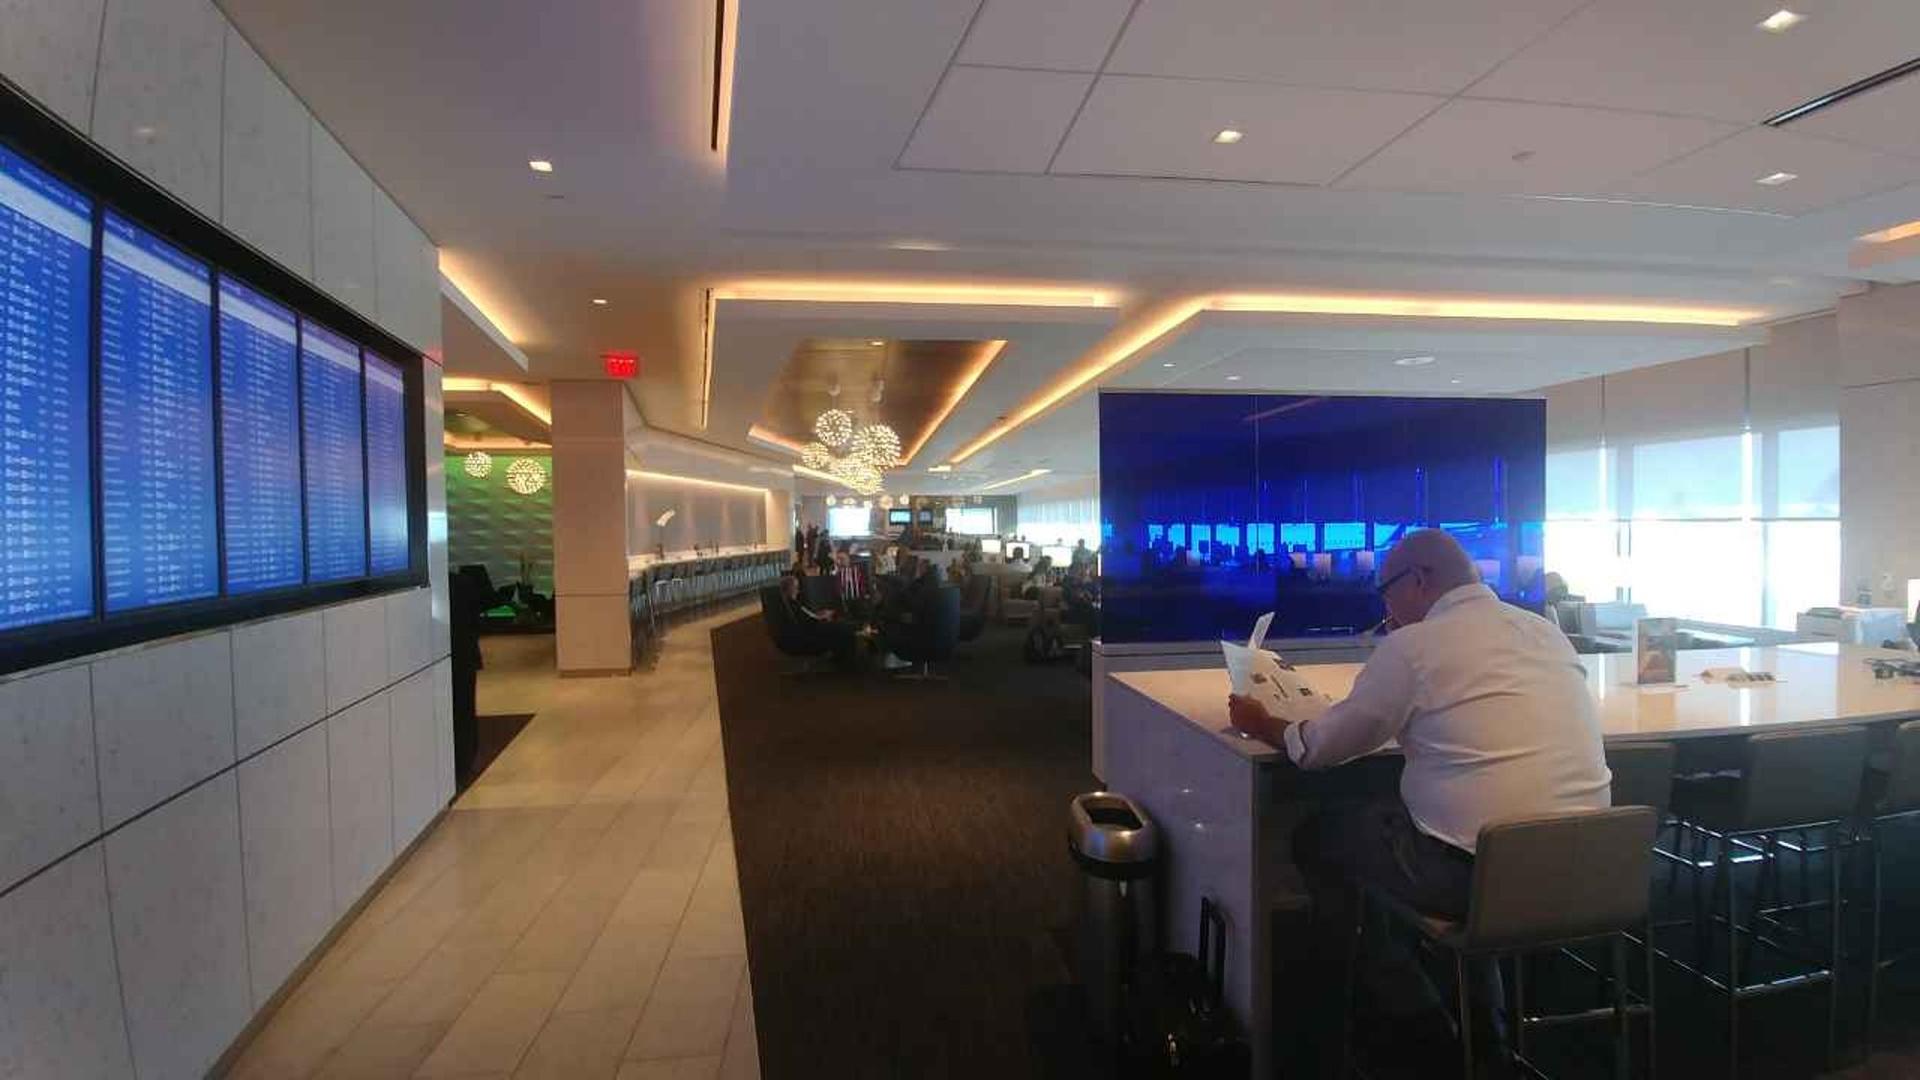 United Airlines United Club image 2 of 7